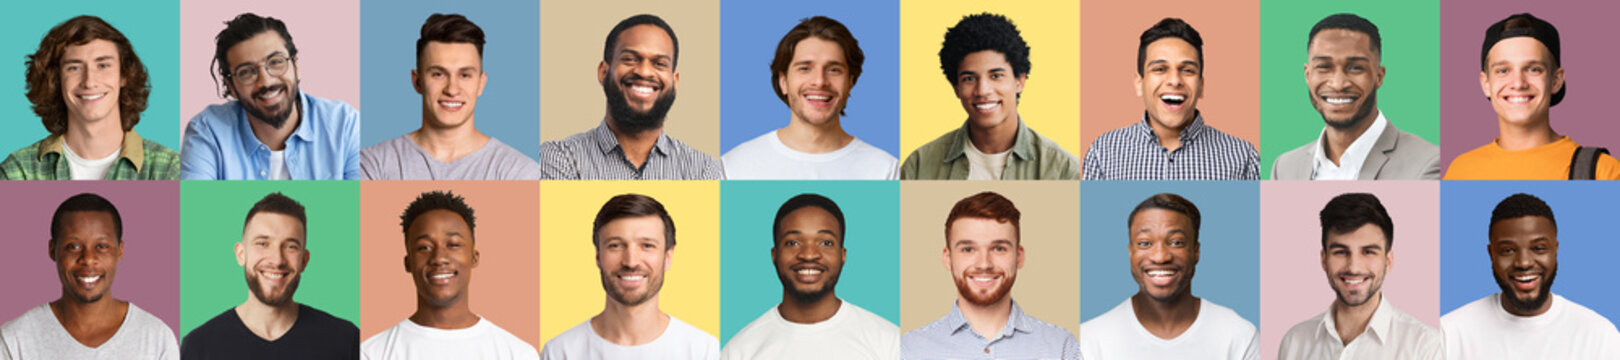 Set of men portraits of different nationalities smiling to camera over colorful backgrounds